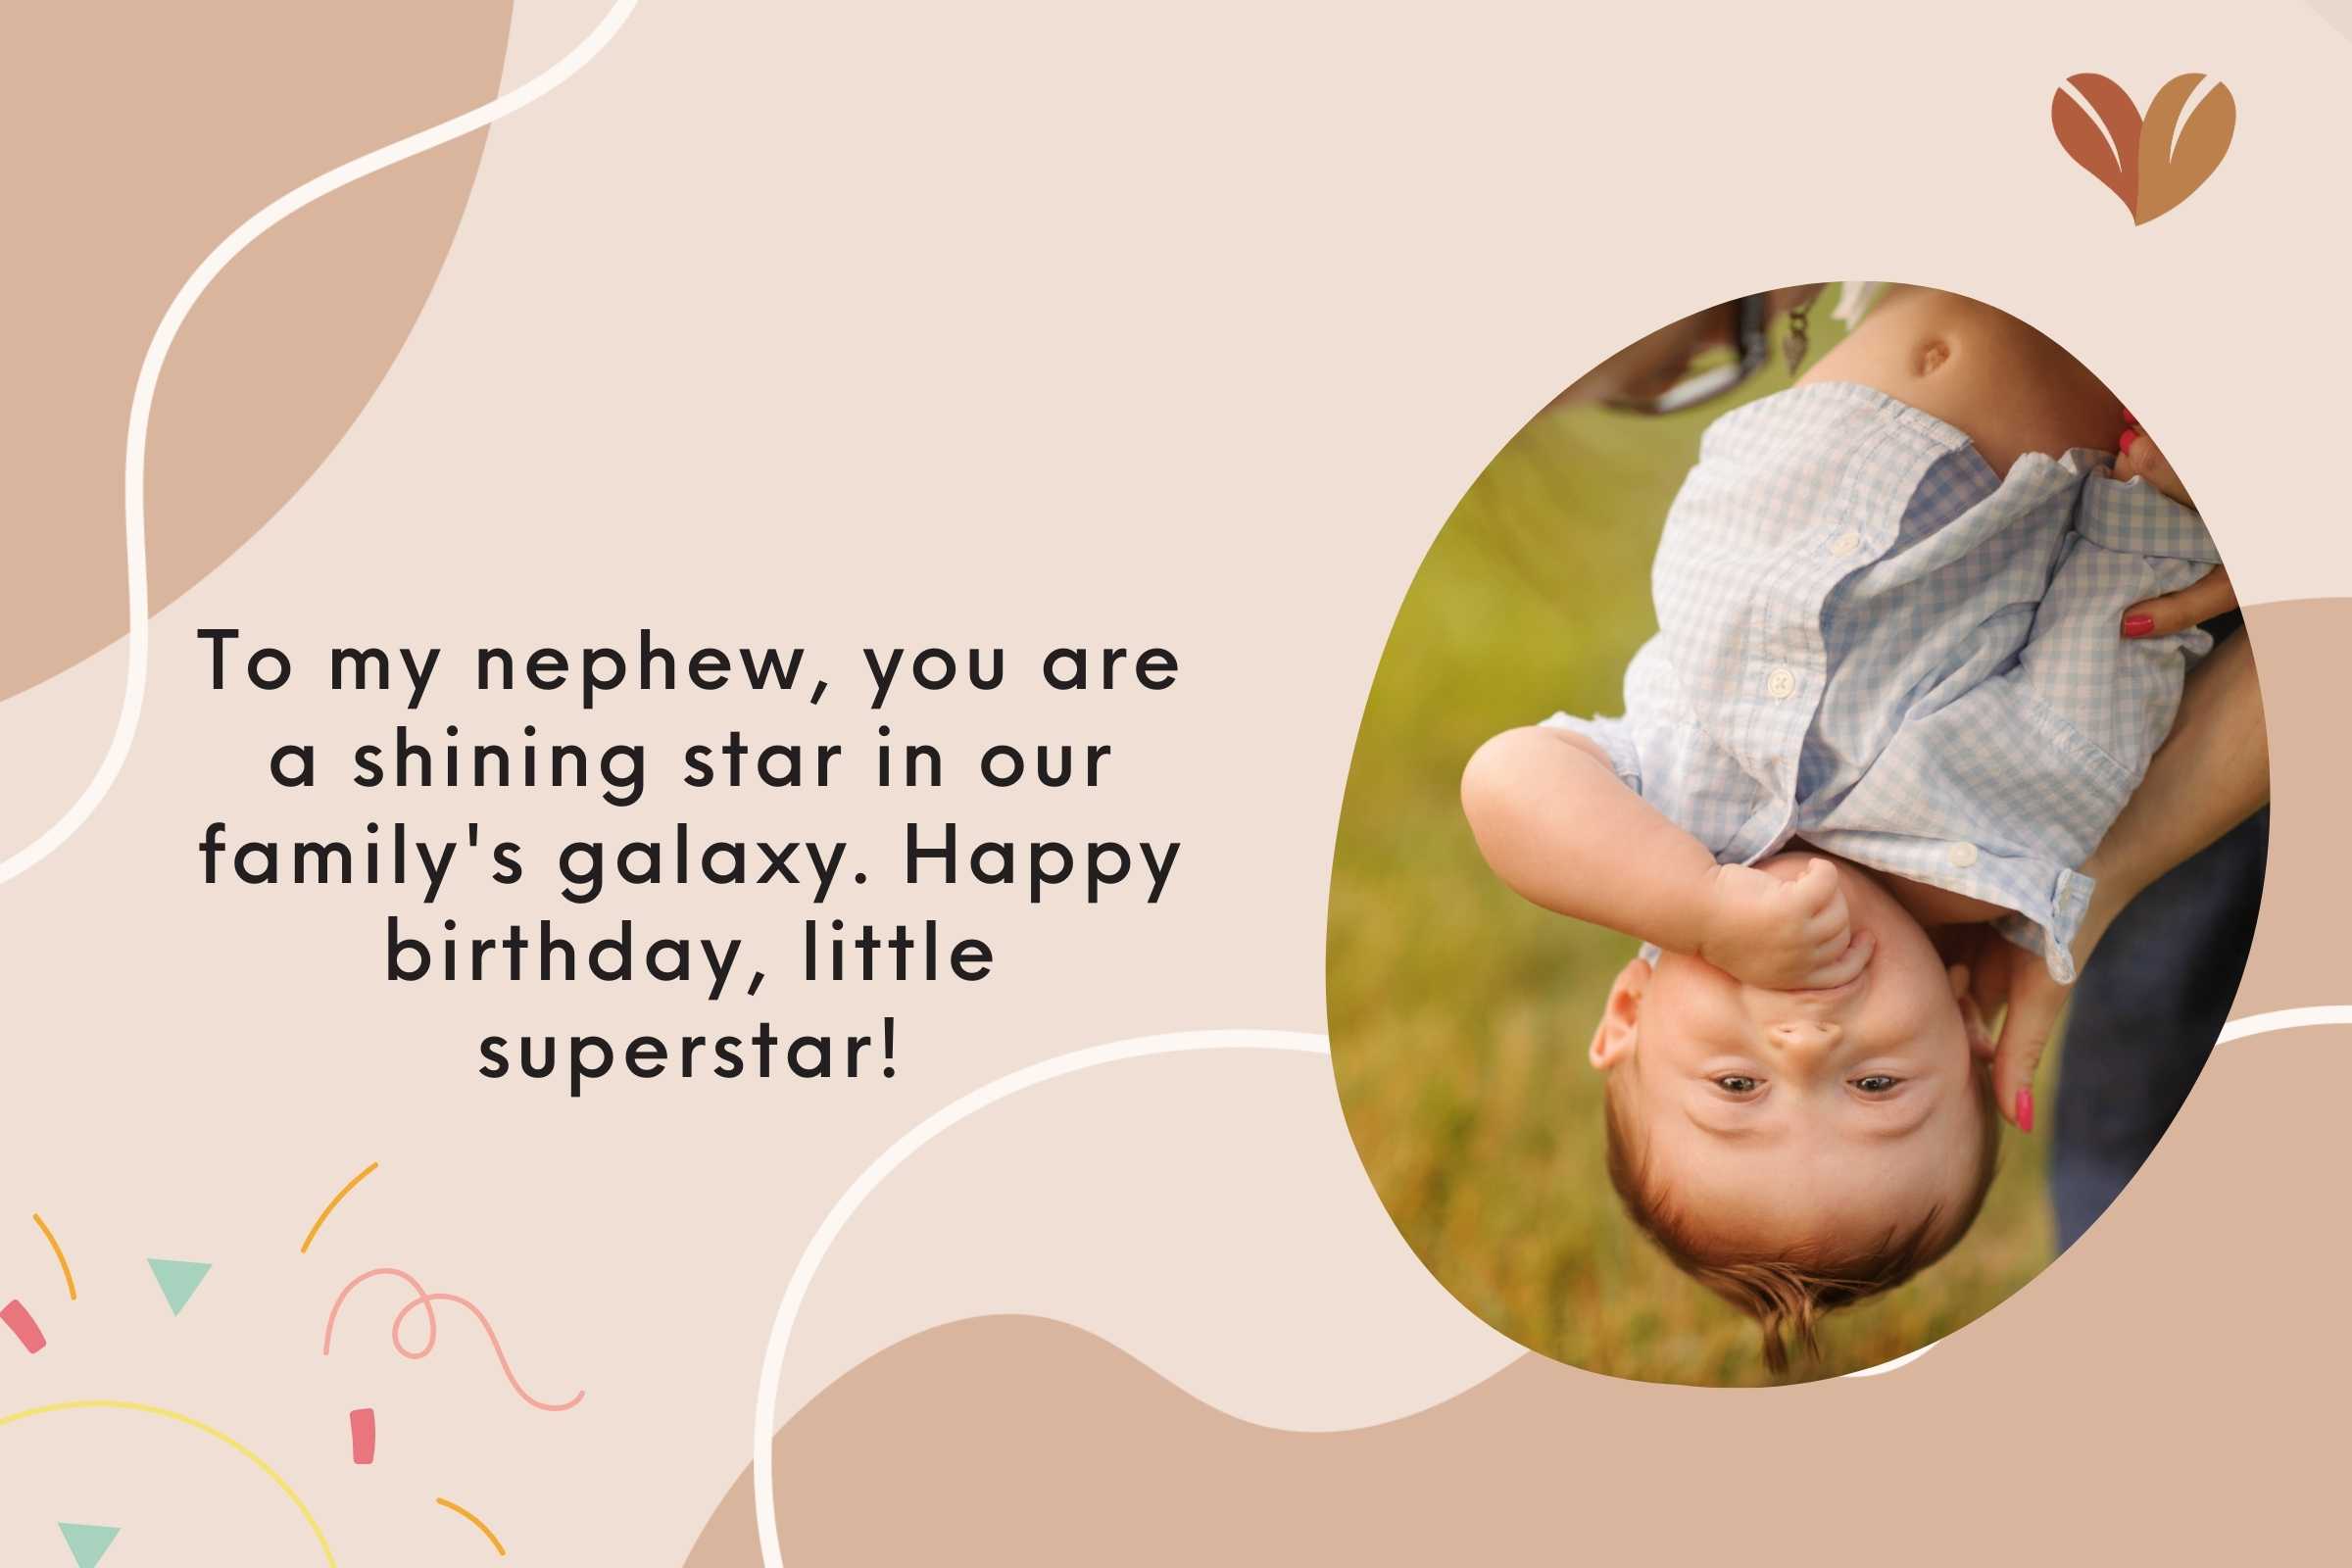 Celebrating with love: heartfelt birthday wishes for a nephew from aunt